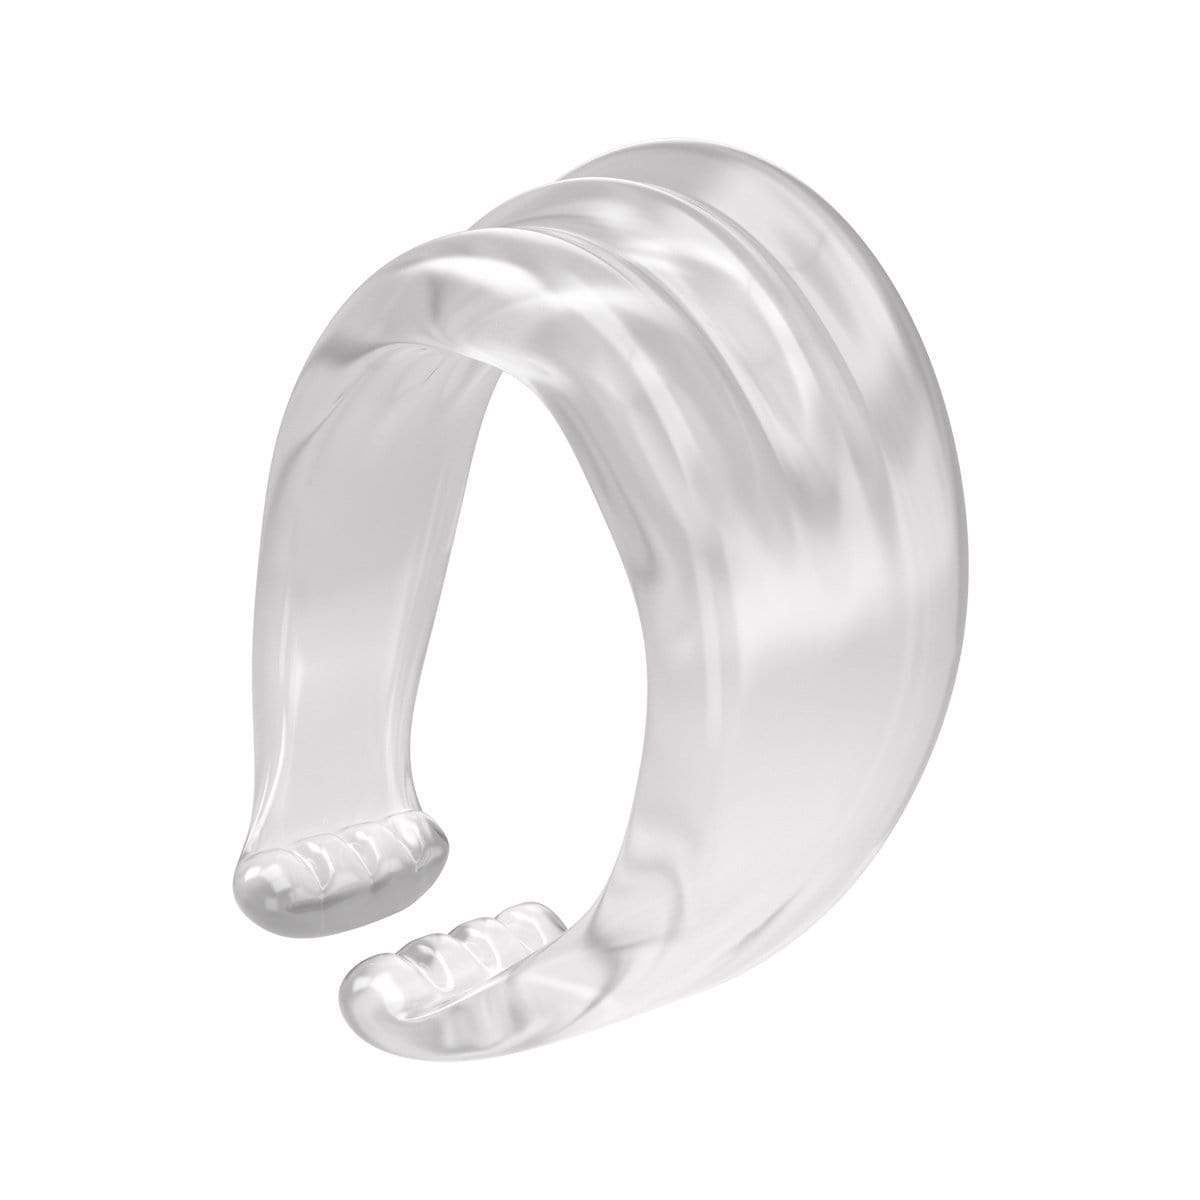 SSI Japan - My Peace Wide Soft Night Size M Correction Cock Ring (Clear) Cock Ring (Non Vibration) 4582137934121 CherryAffairs